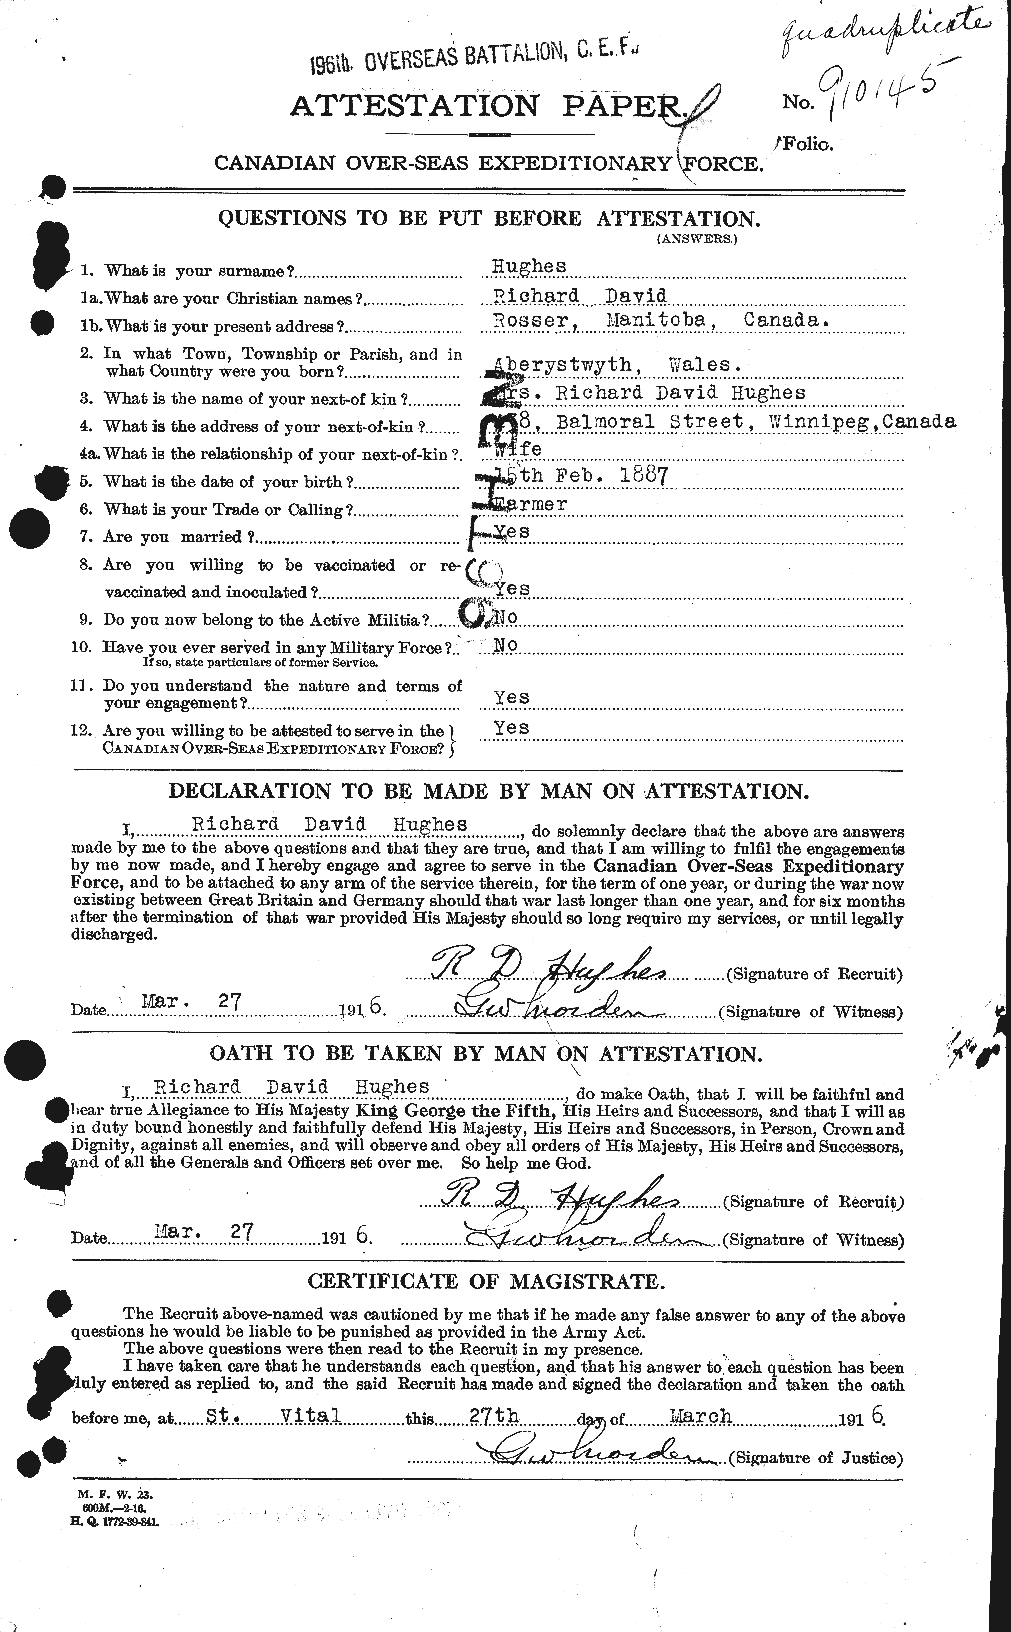 Personnel Records of the First World War - CEF 404189a